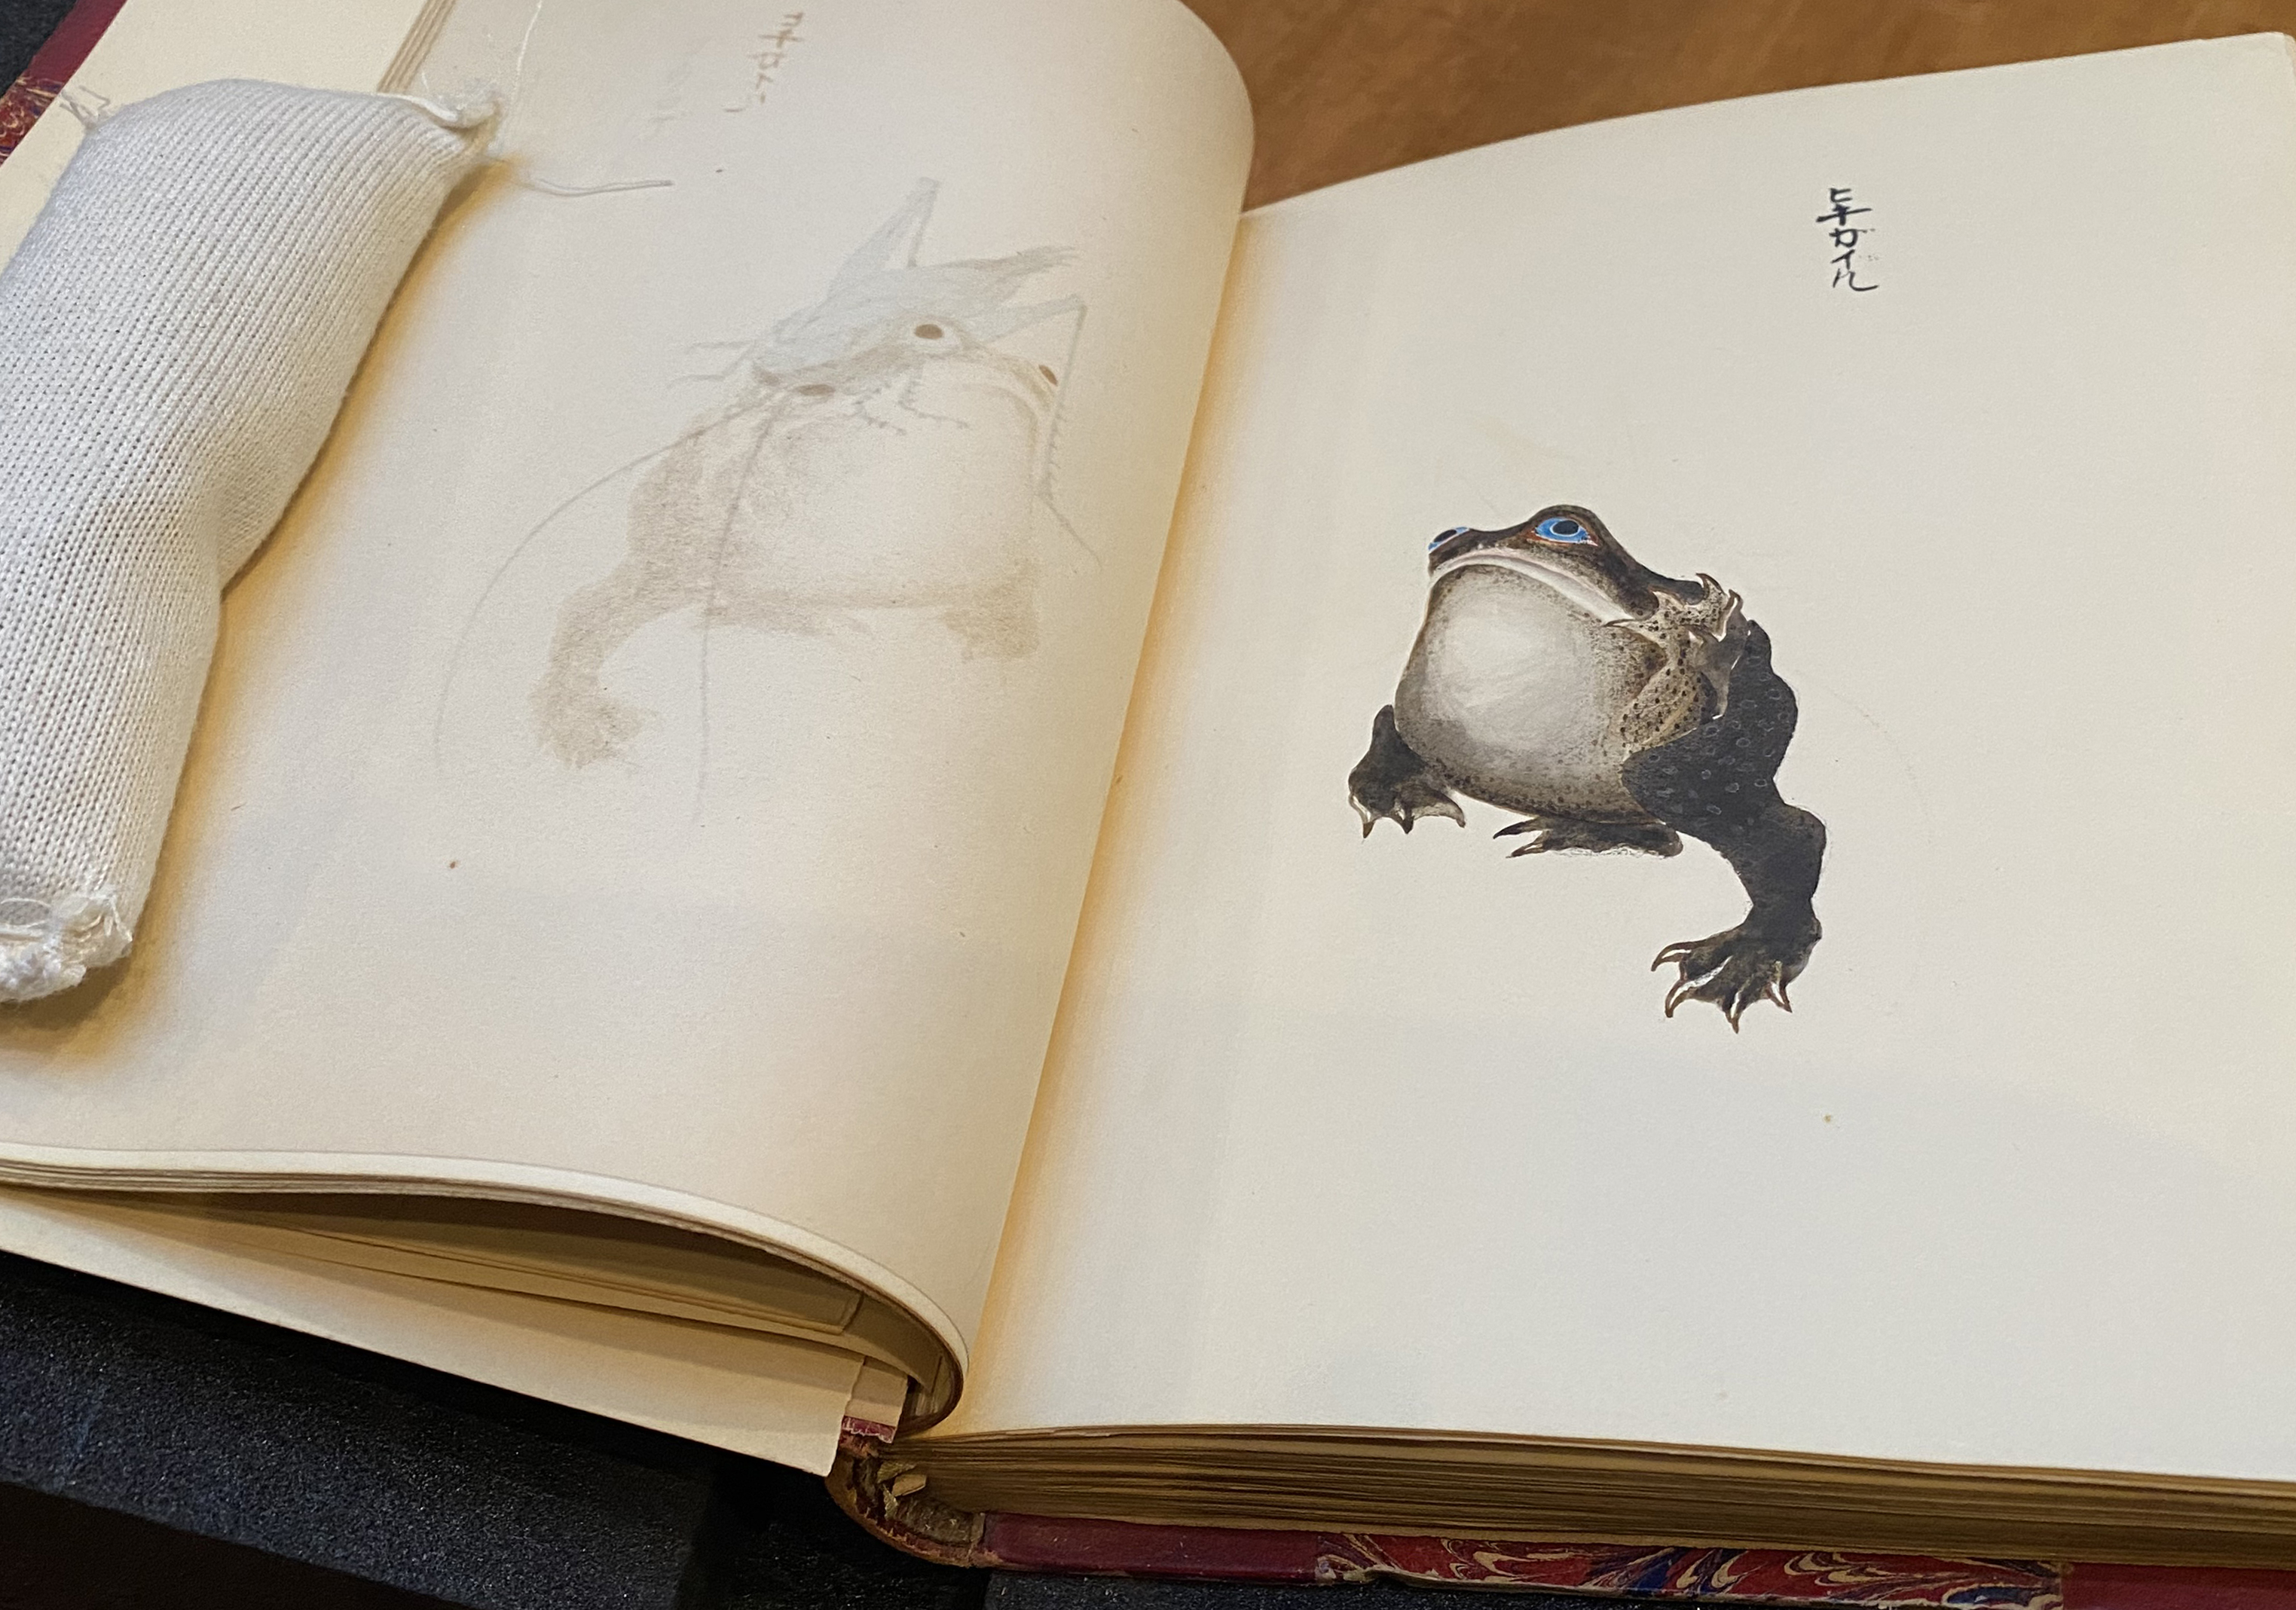 Hand-drawn frog in an ancient Japanese text.